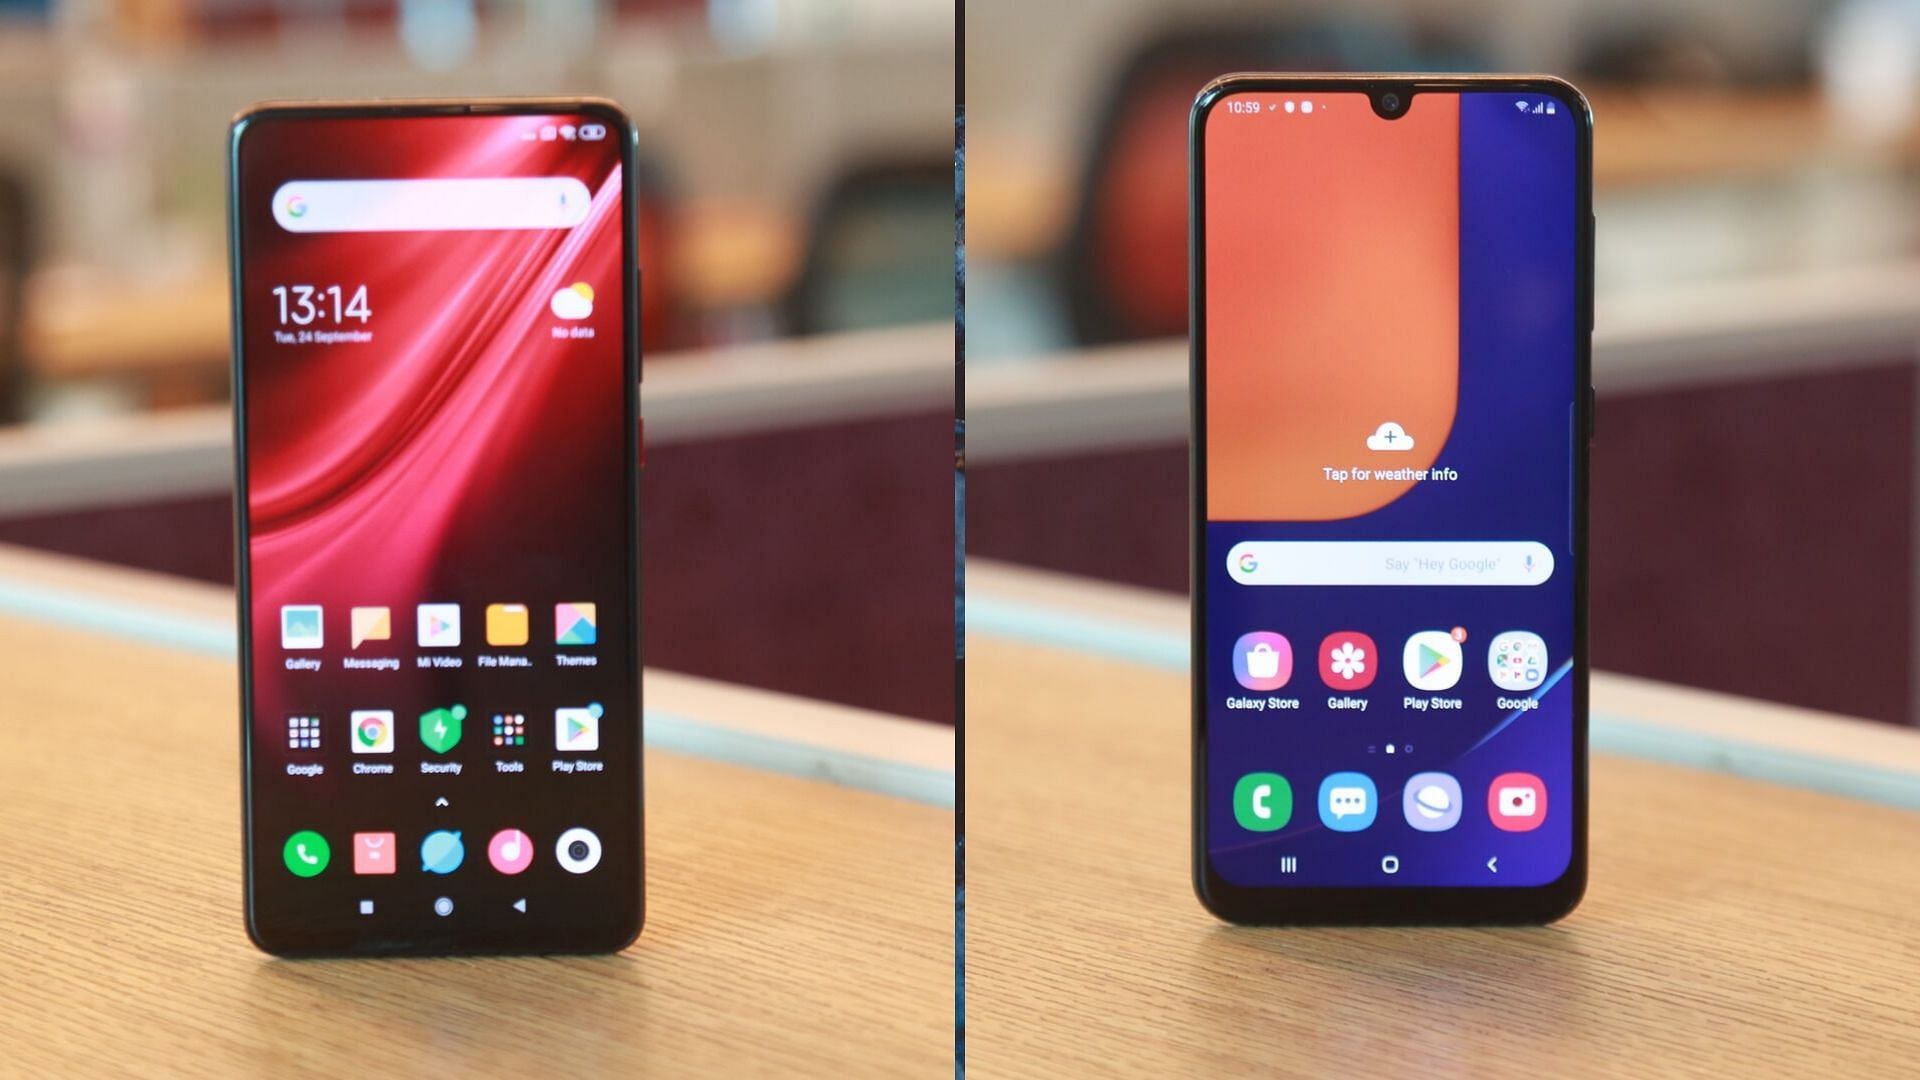 Both the Redmi K20 Pro (left) and the Galaxy A50s (right) comes with Super AMOLED displays.